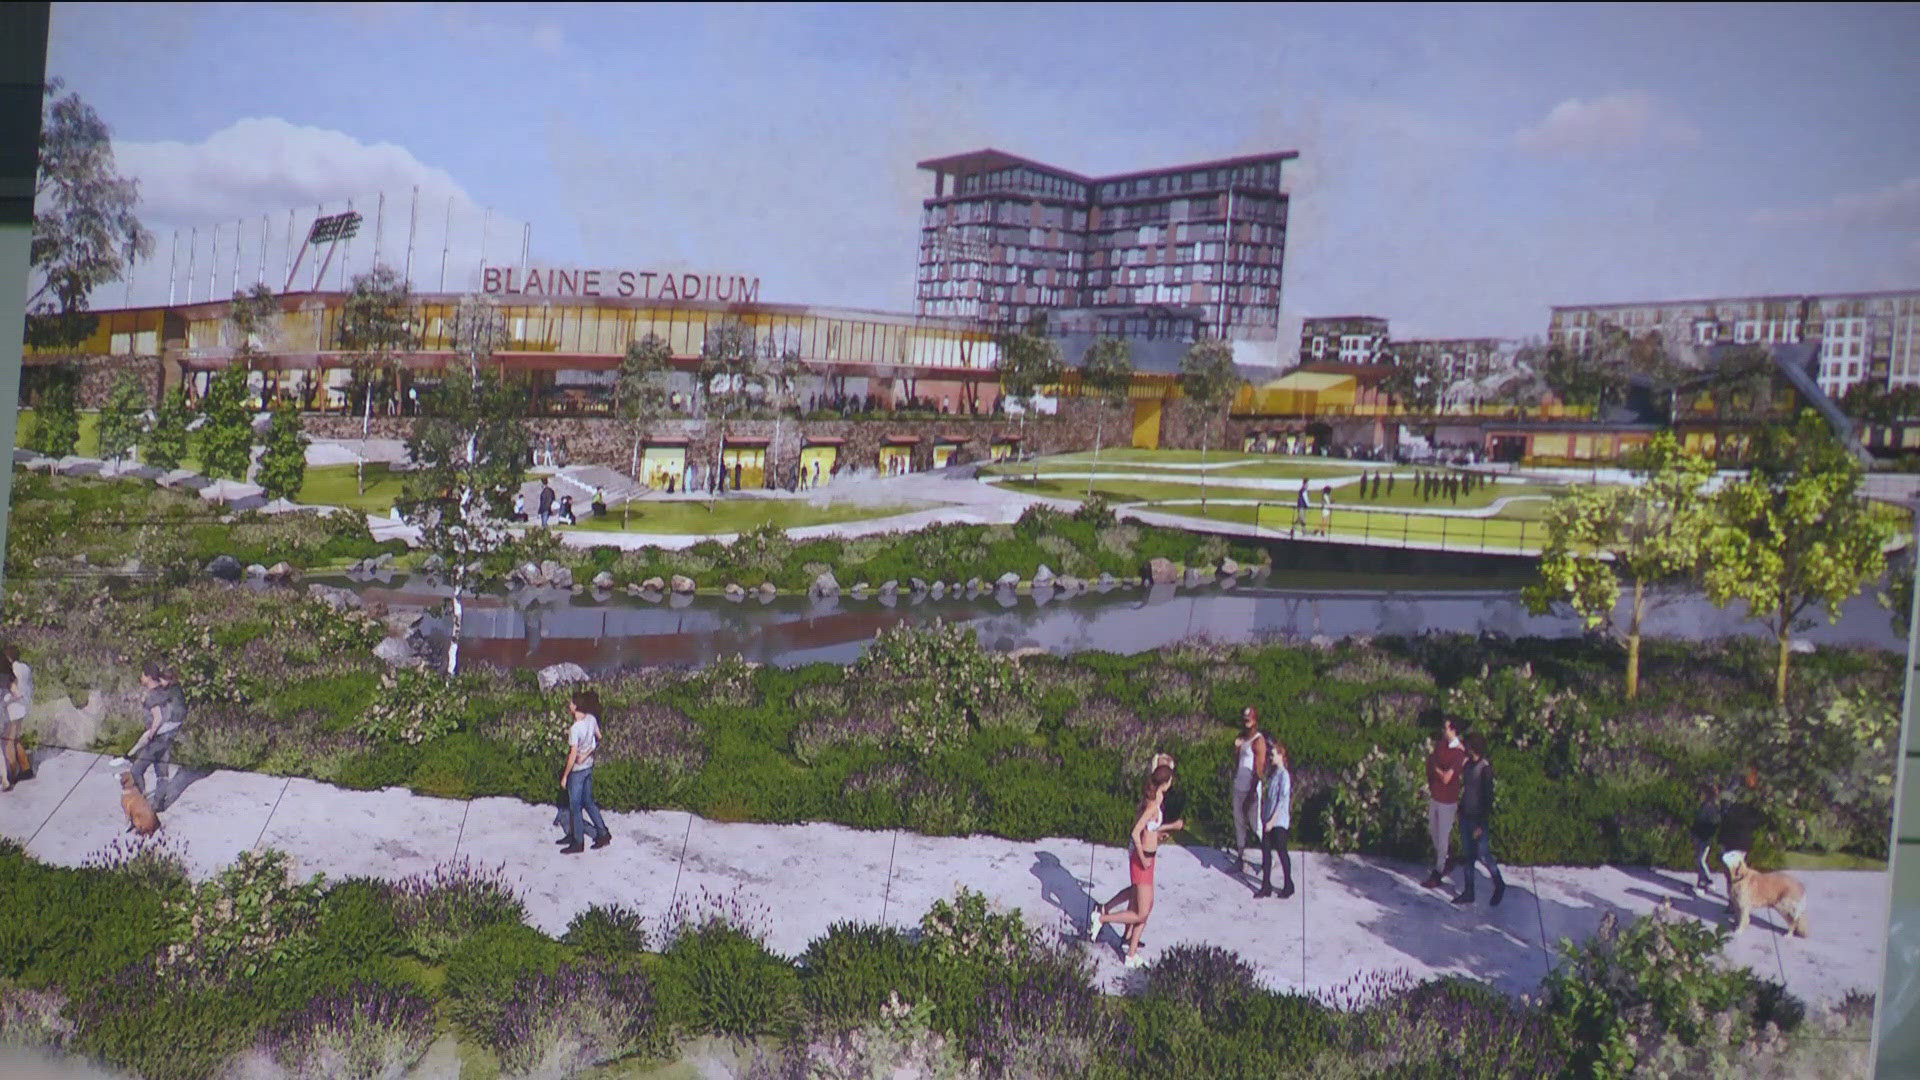 The plan would bring new hotels, restaurants, entertainment and housing to the area.